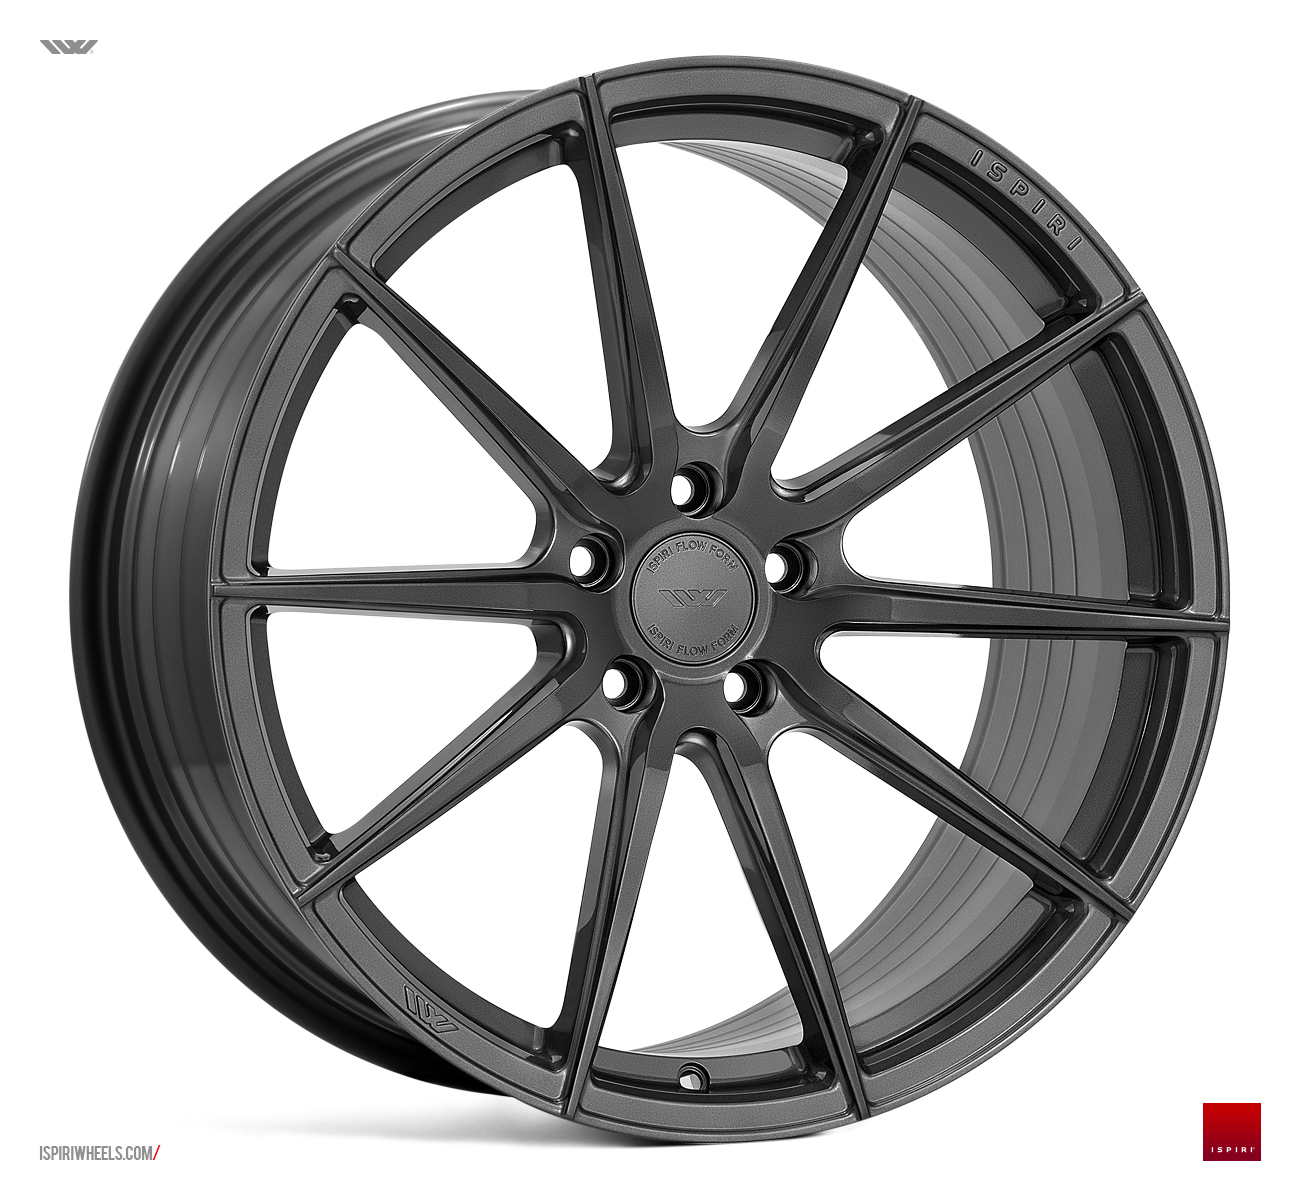 NEW 19  ISPIRI FFR1 MULTI SPOKE ALLOY WHEELS IN CARBON GRAPHITE  DEEPER CONCAVE 9 5  OR 10  REARS   VARIOUS OFFSETS